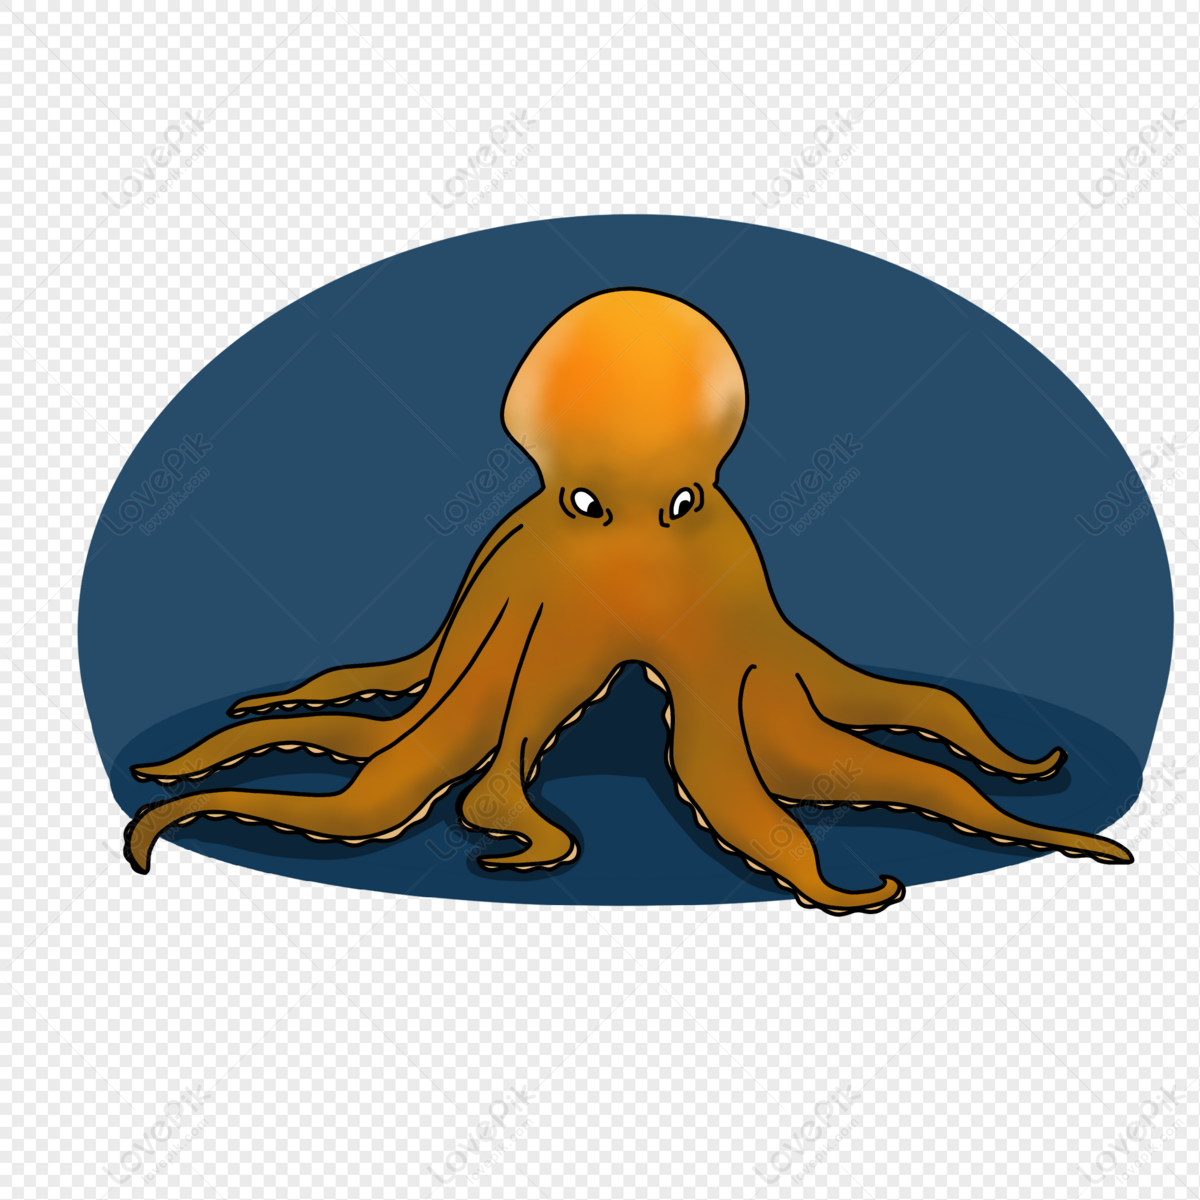 Cartoon Big Head Octopus PNG Transparent Background And Clipart Image For  Free Download - Lovepik | 401457050